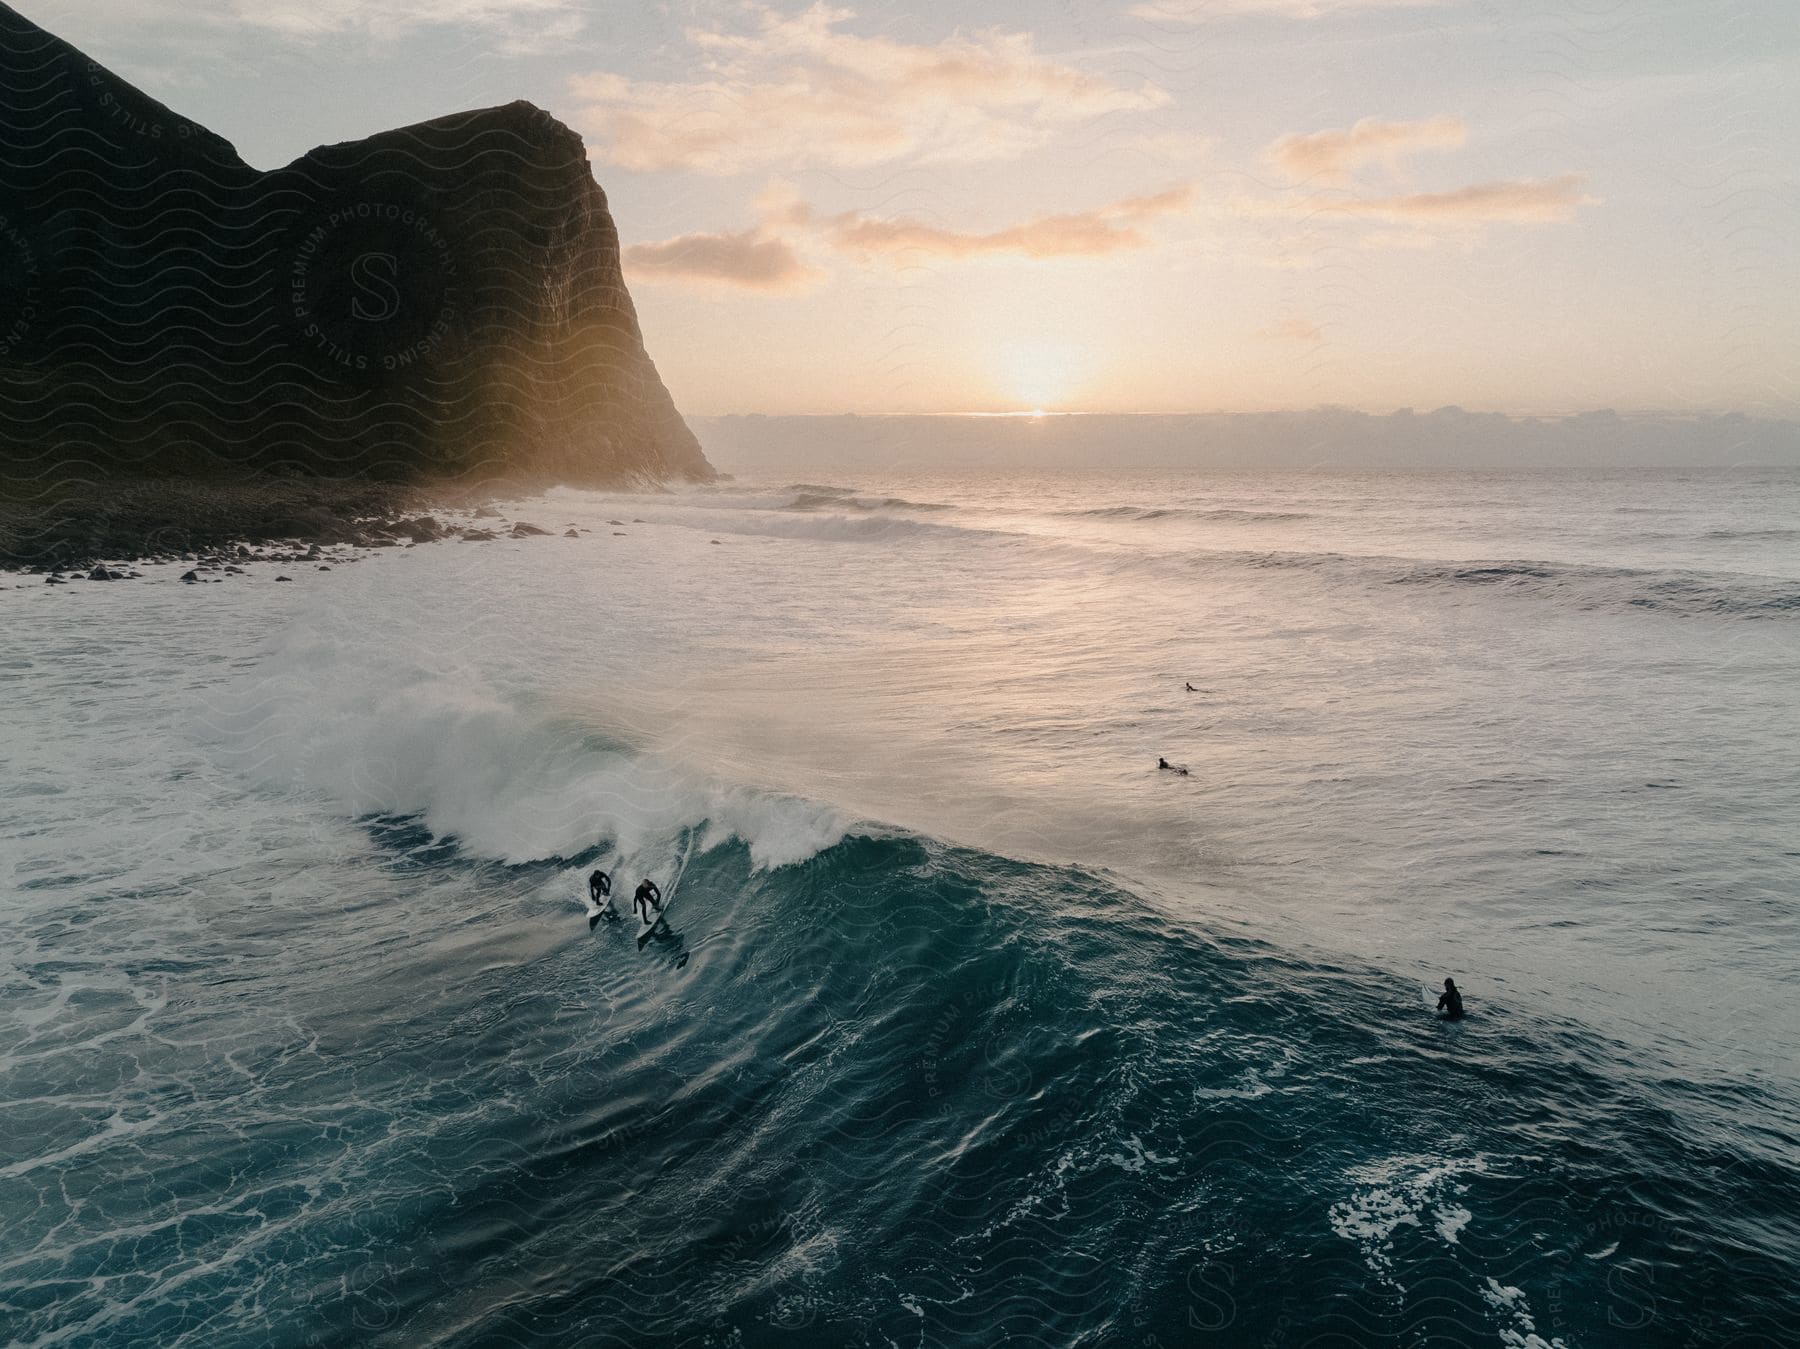 Surfers riding a wave near a promontory as the sun shines on the horizon